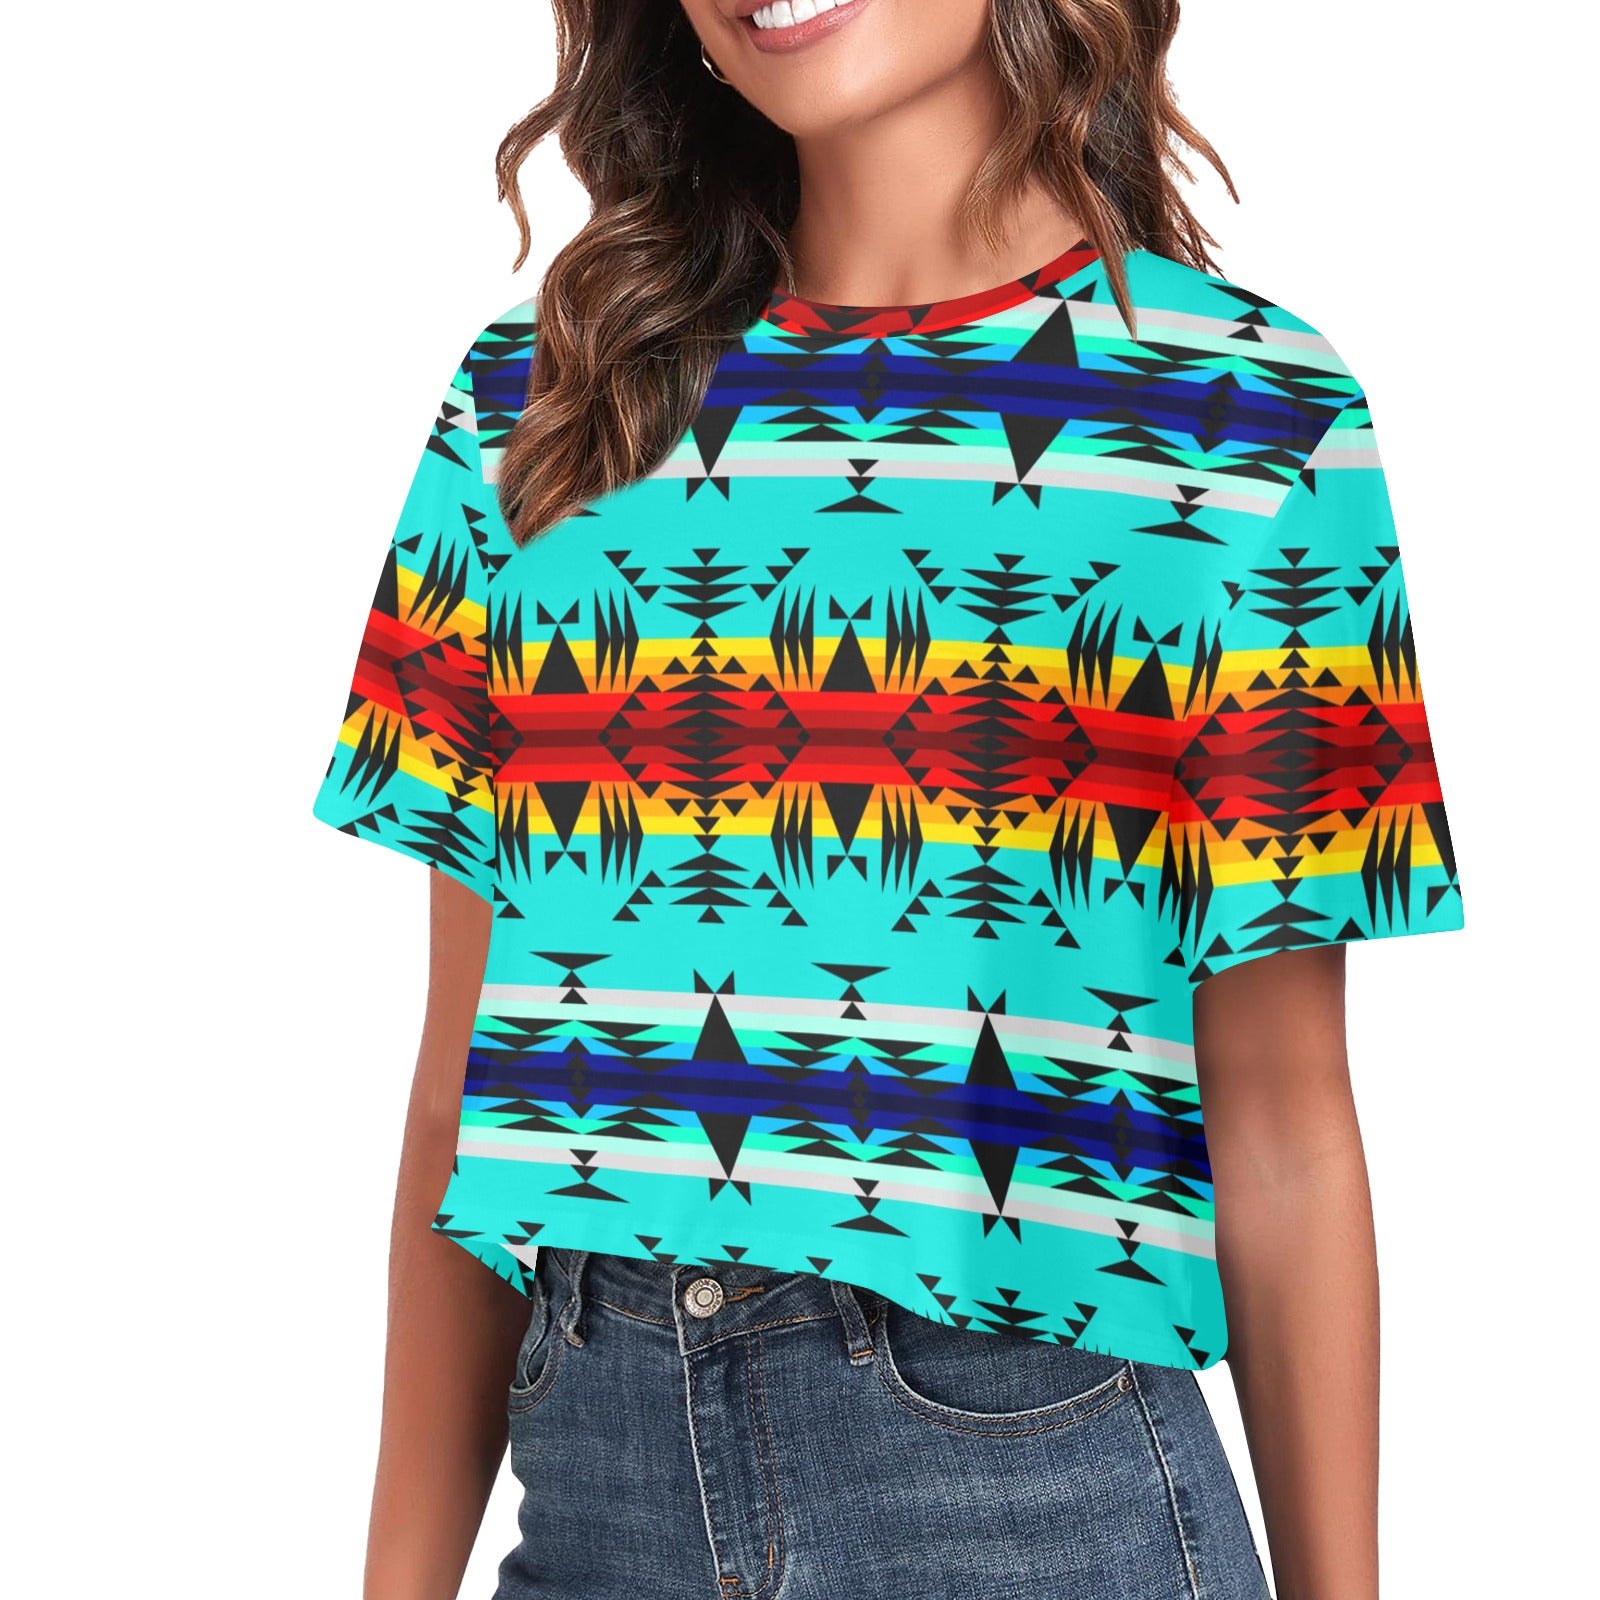 Between the Mountains Women's Cropped T-shirt